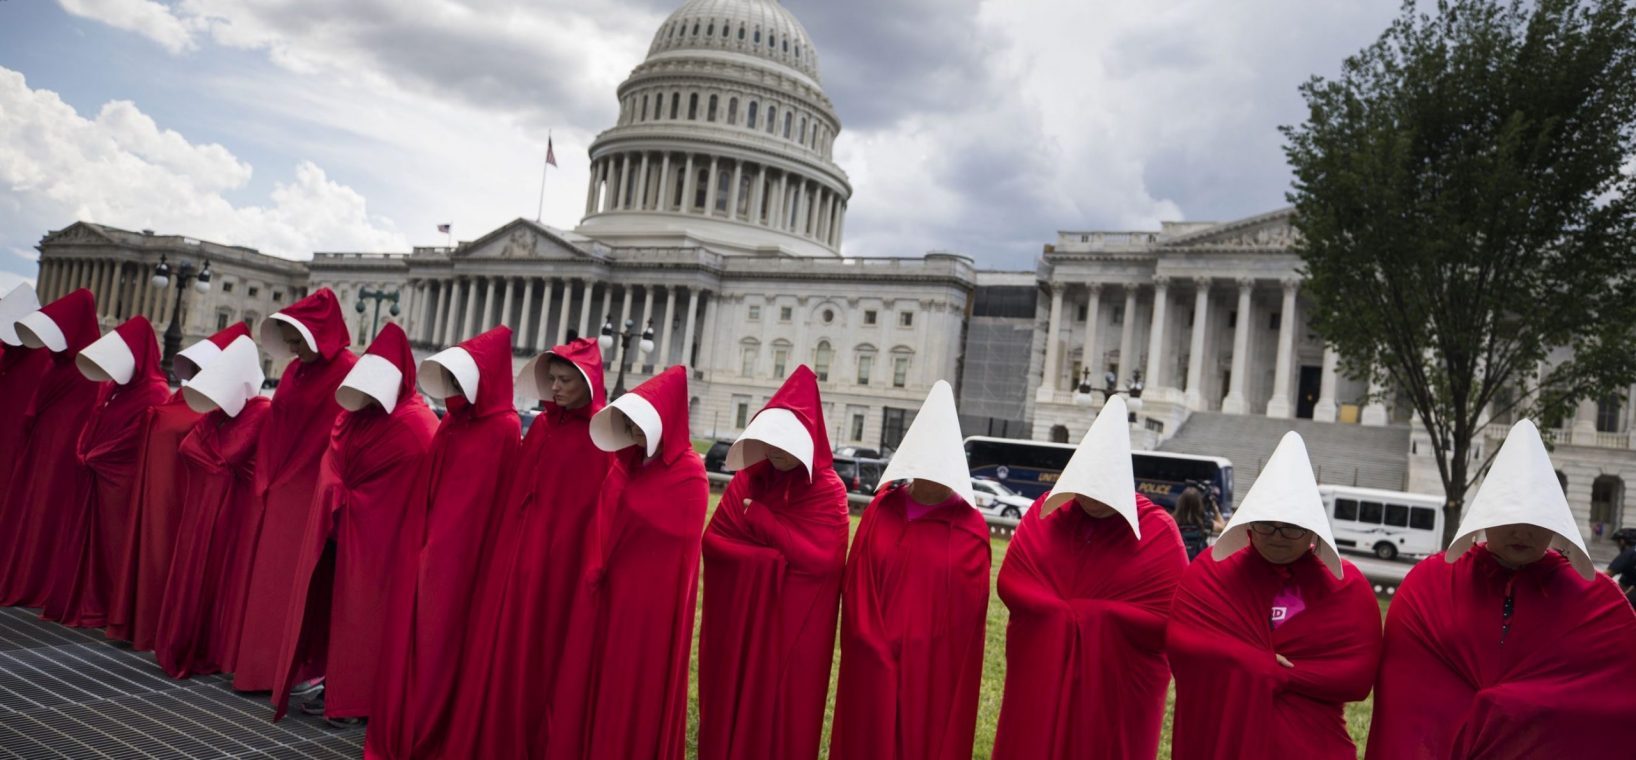 30 women stand somberly in front of the Capitol building in Washington, D.C., dressed in red cloaks and winged bonnets inspired by the Hulu TV adaptation of Margaret Atwood’s novel The Handmaid’s Tale